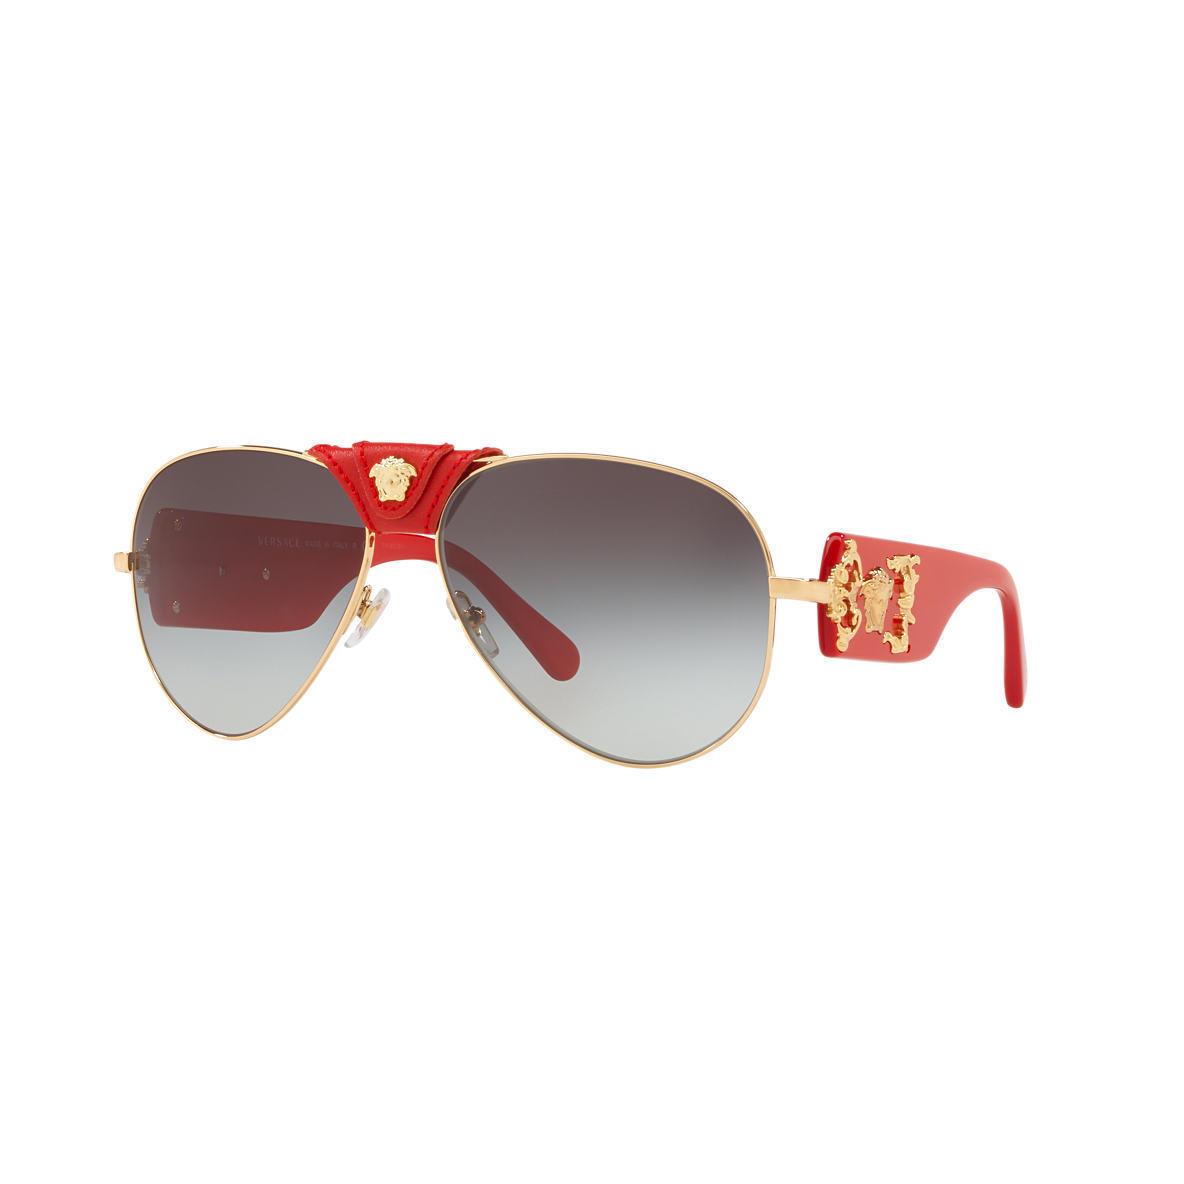 Versace Sunglasses VE2150Q 1002/11 Gold-red-leather / Grey Gradient Lens